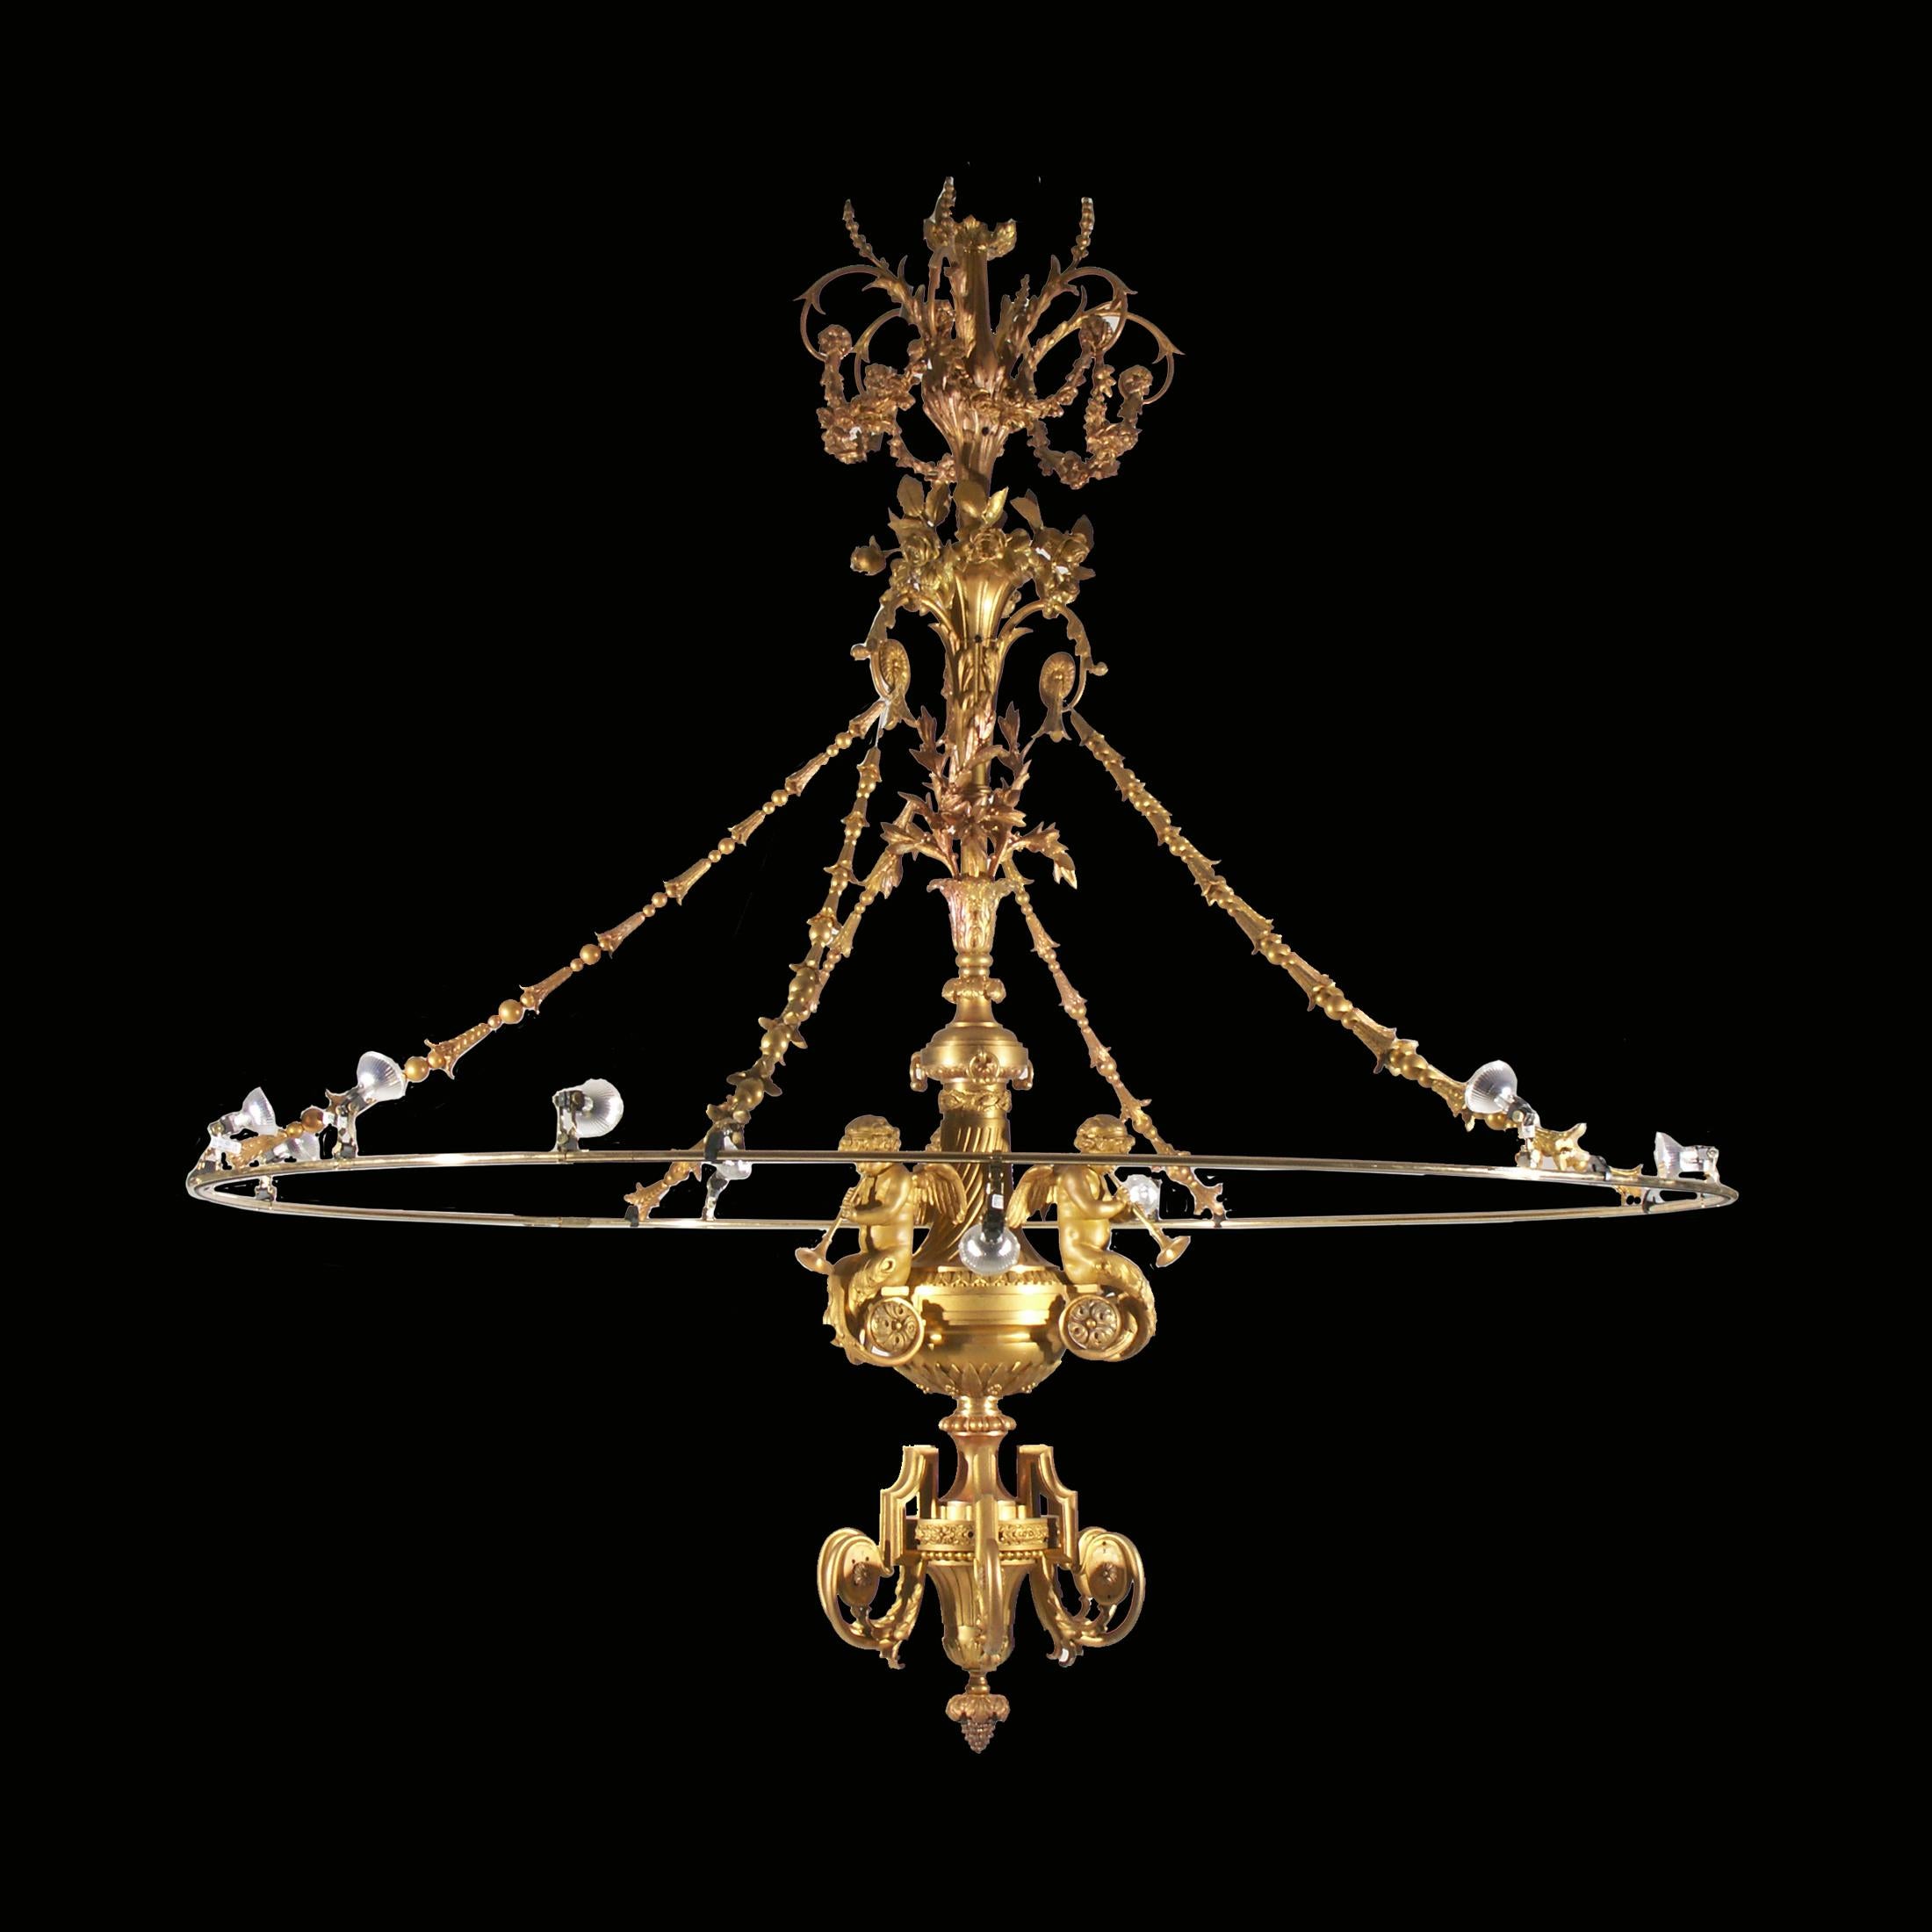 Centerpiece of a magnificent chandelier from a Palace at the Vienna-Ringstrasse, modified with low-voltage spotlights. Very costly work with casted and chased parts. Obviously there were arms originally which were missing. A rim with spotlights was